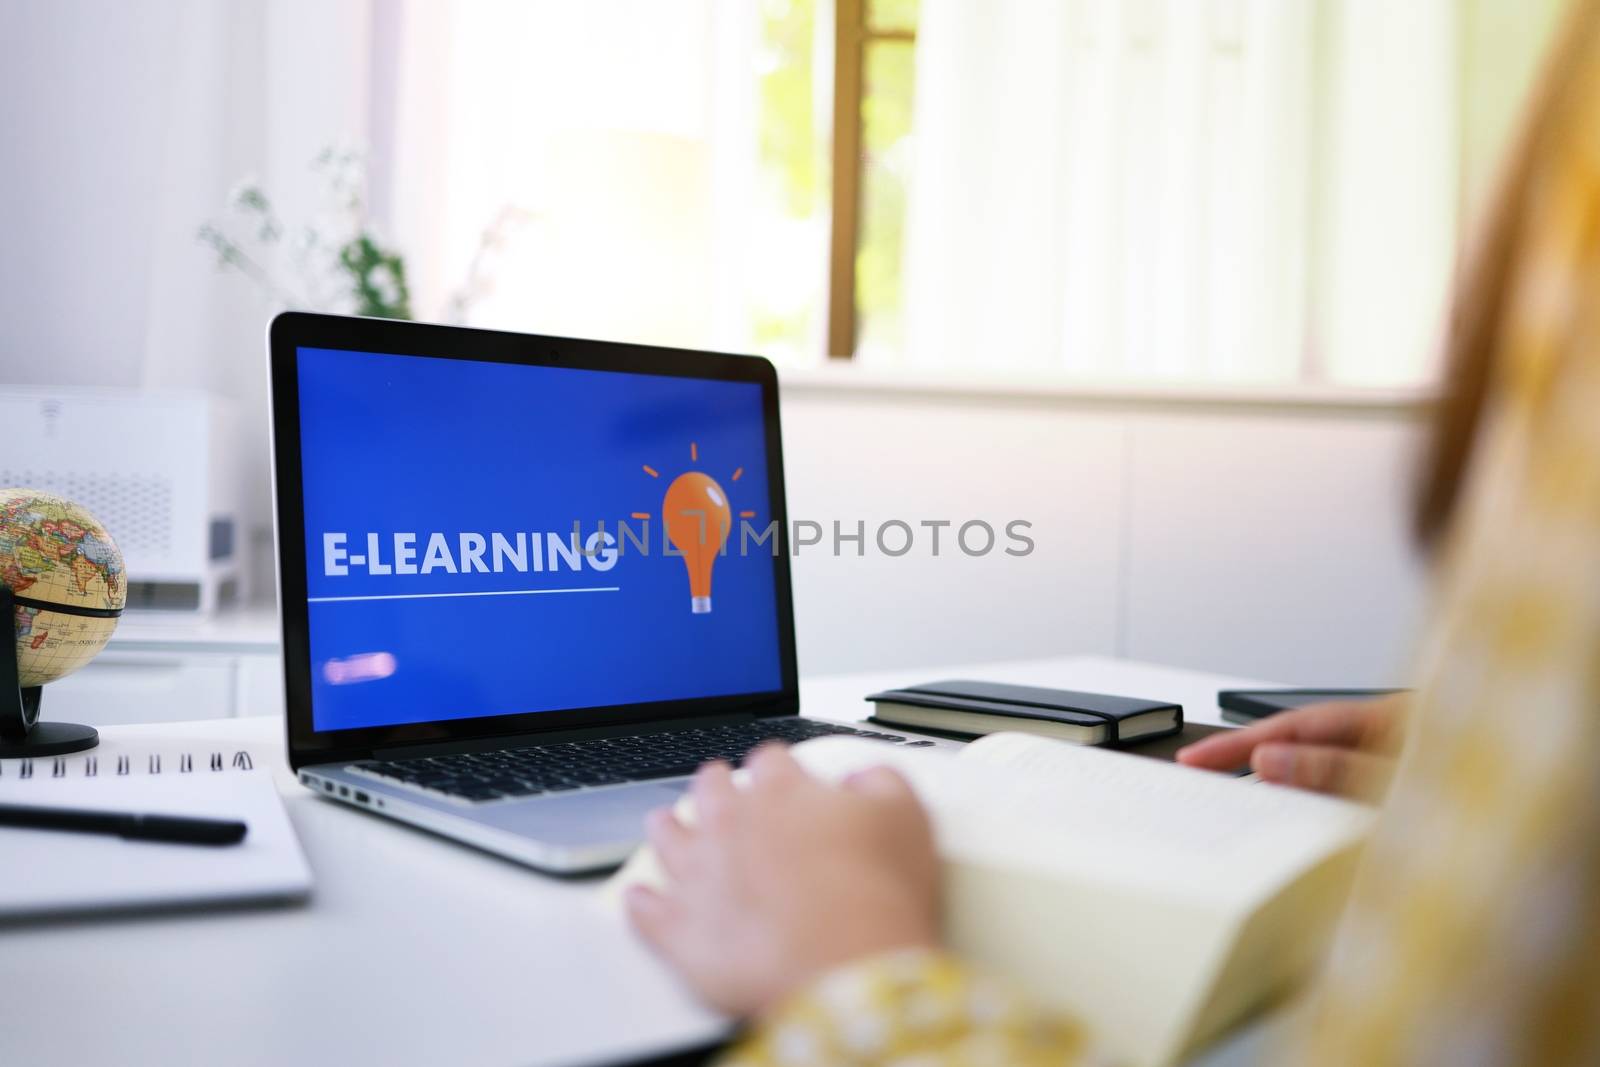 E-learning Education Internet Networking . Young businesswoman sitting and used laptop with inscription on screen e-learning. Online education e-learning.